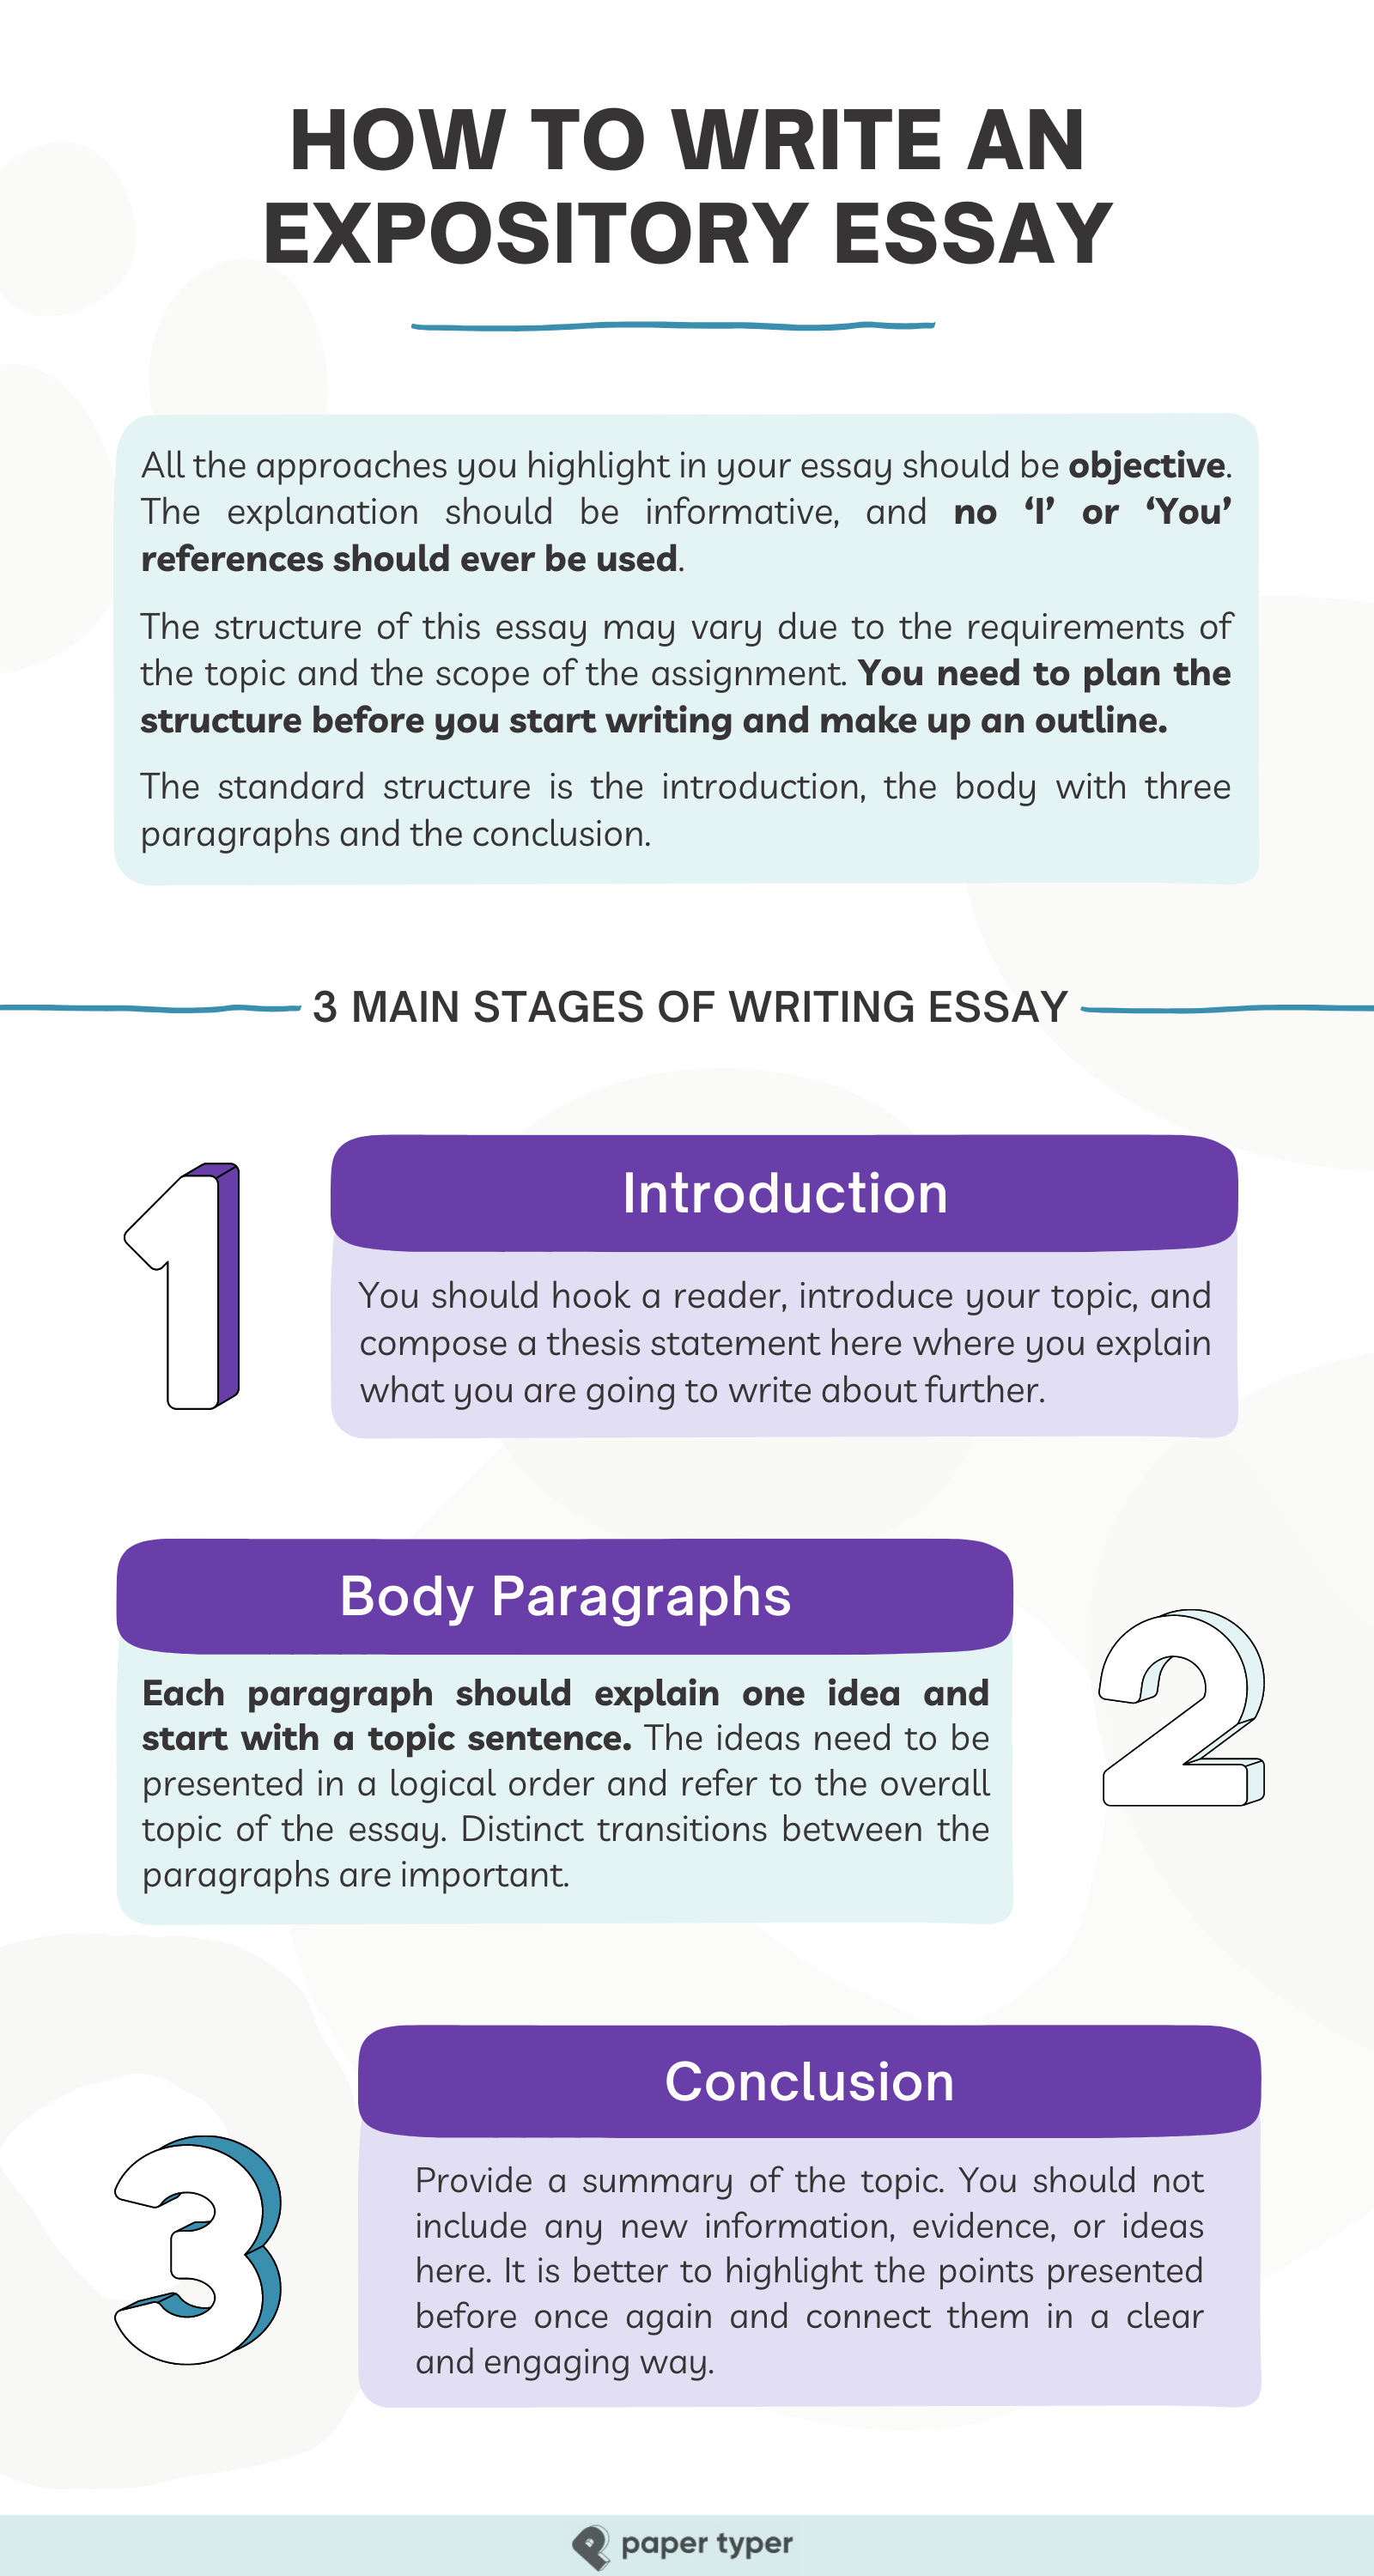 Infographic about How to Write an Expository Essay